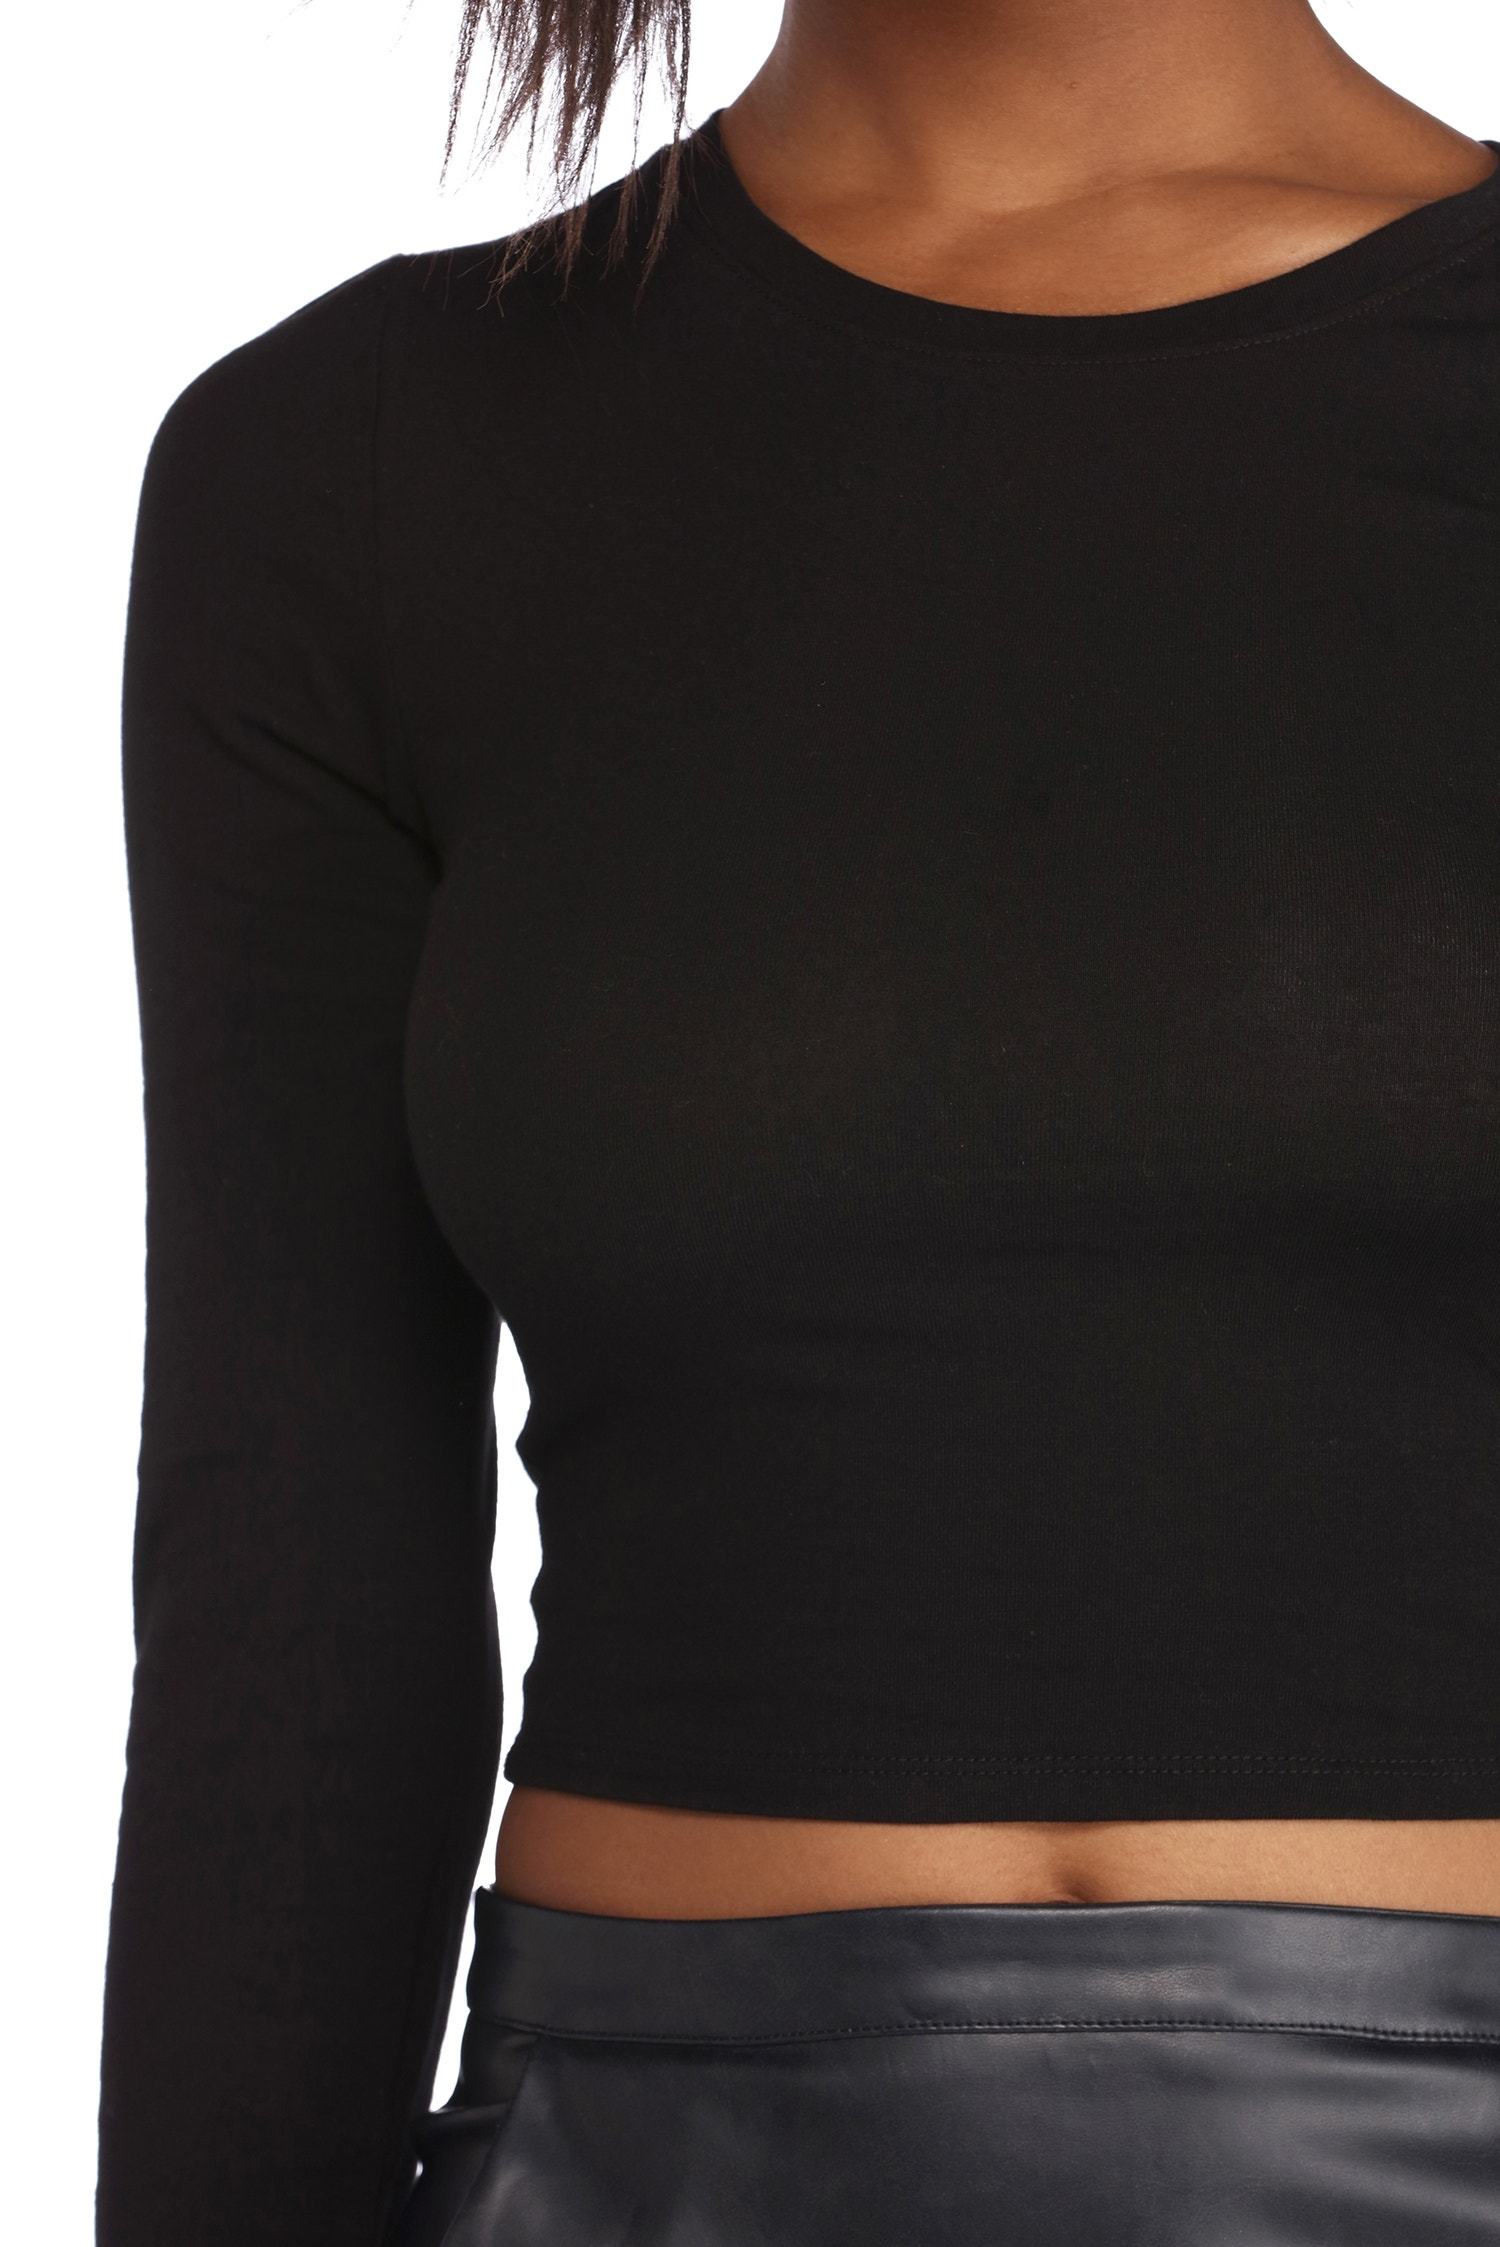 Hit The Basics Crop Top - Lady Occasions